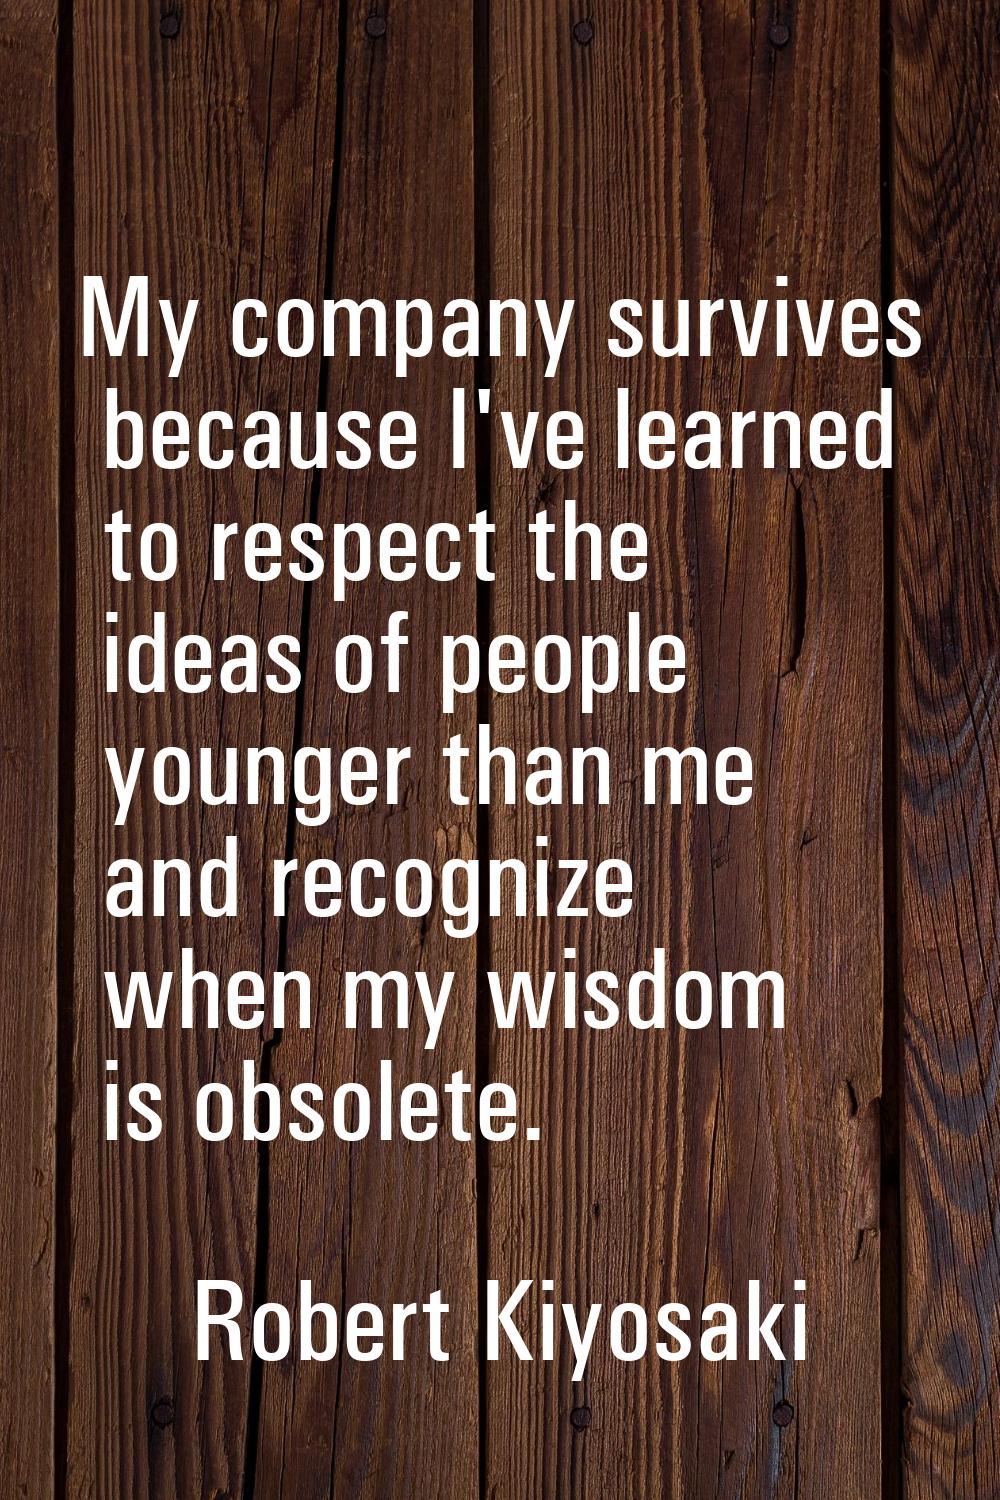 My company survives because I've learned to respect the ideas of people younger than me and recogni